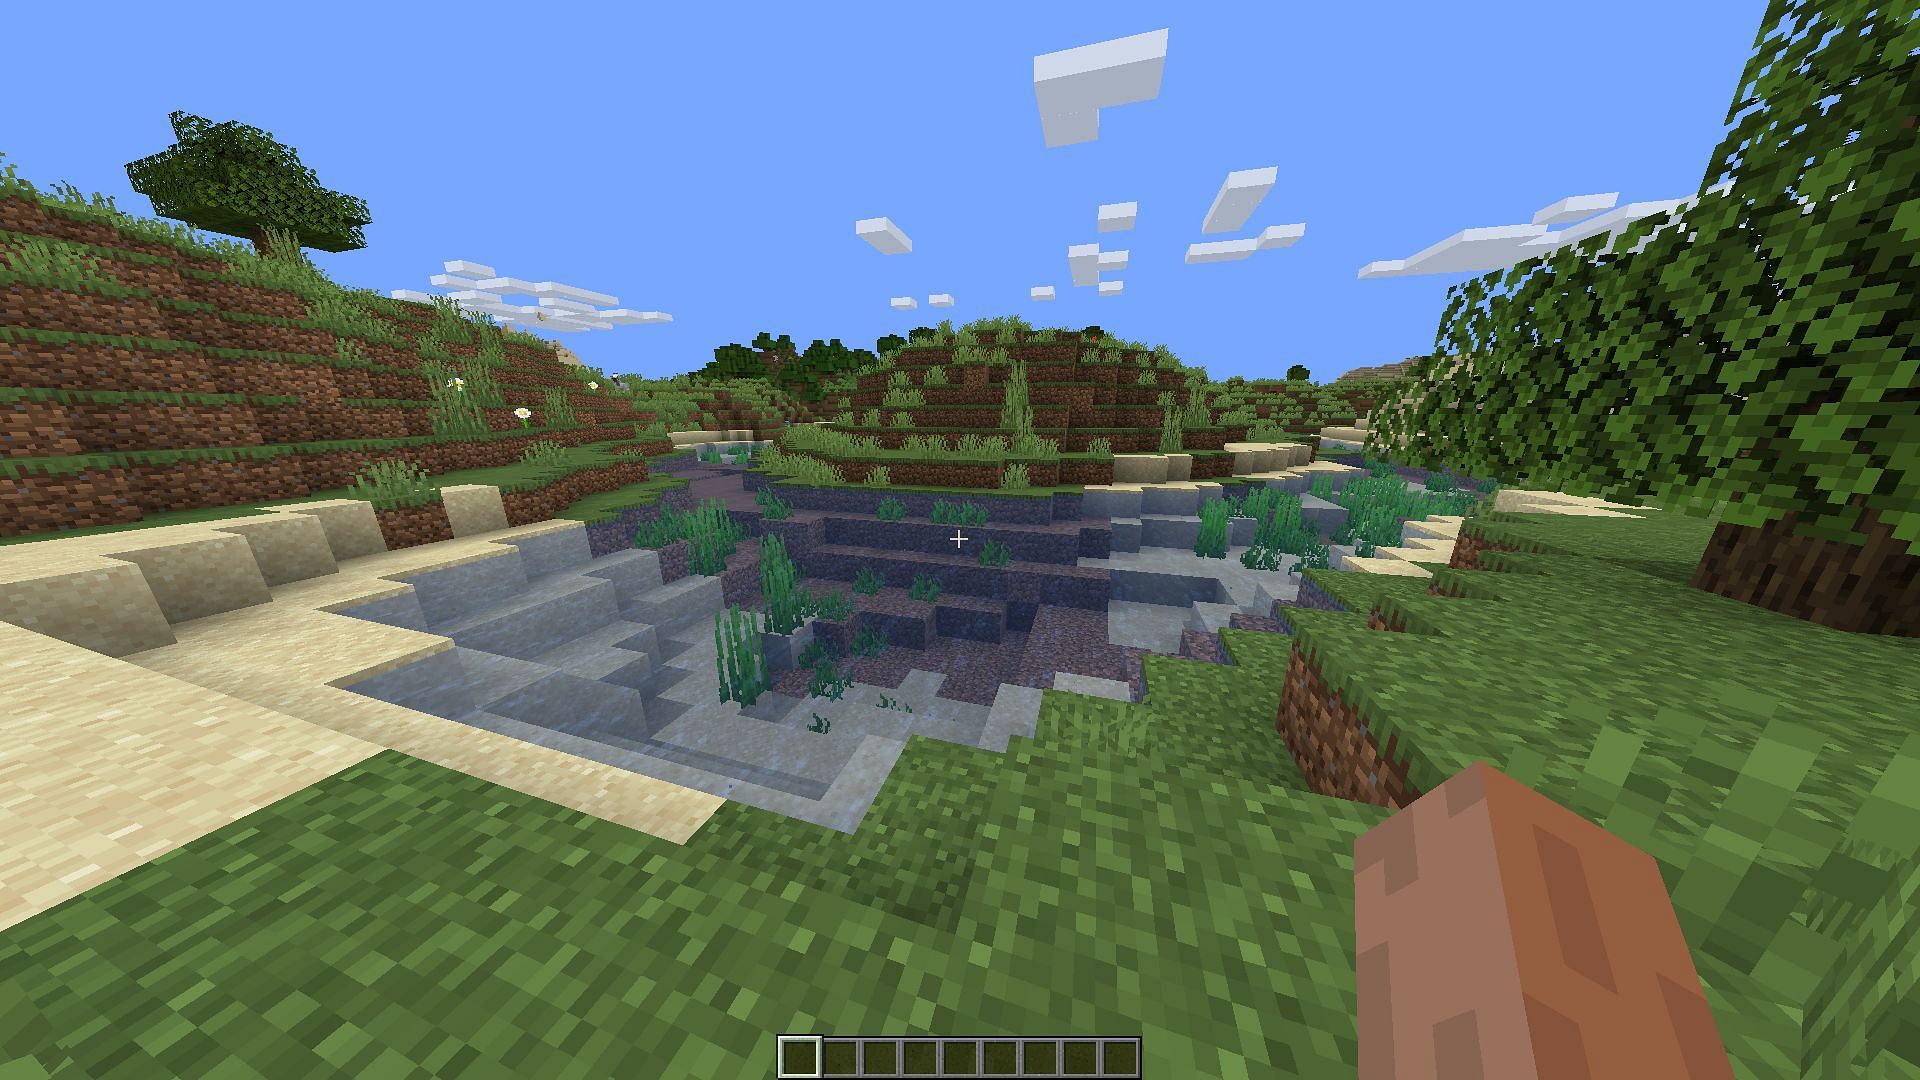 This texture pack increases the transparency of water blocks in Minecraft 1.19 (Image via CurseForge)